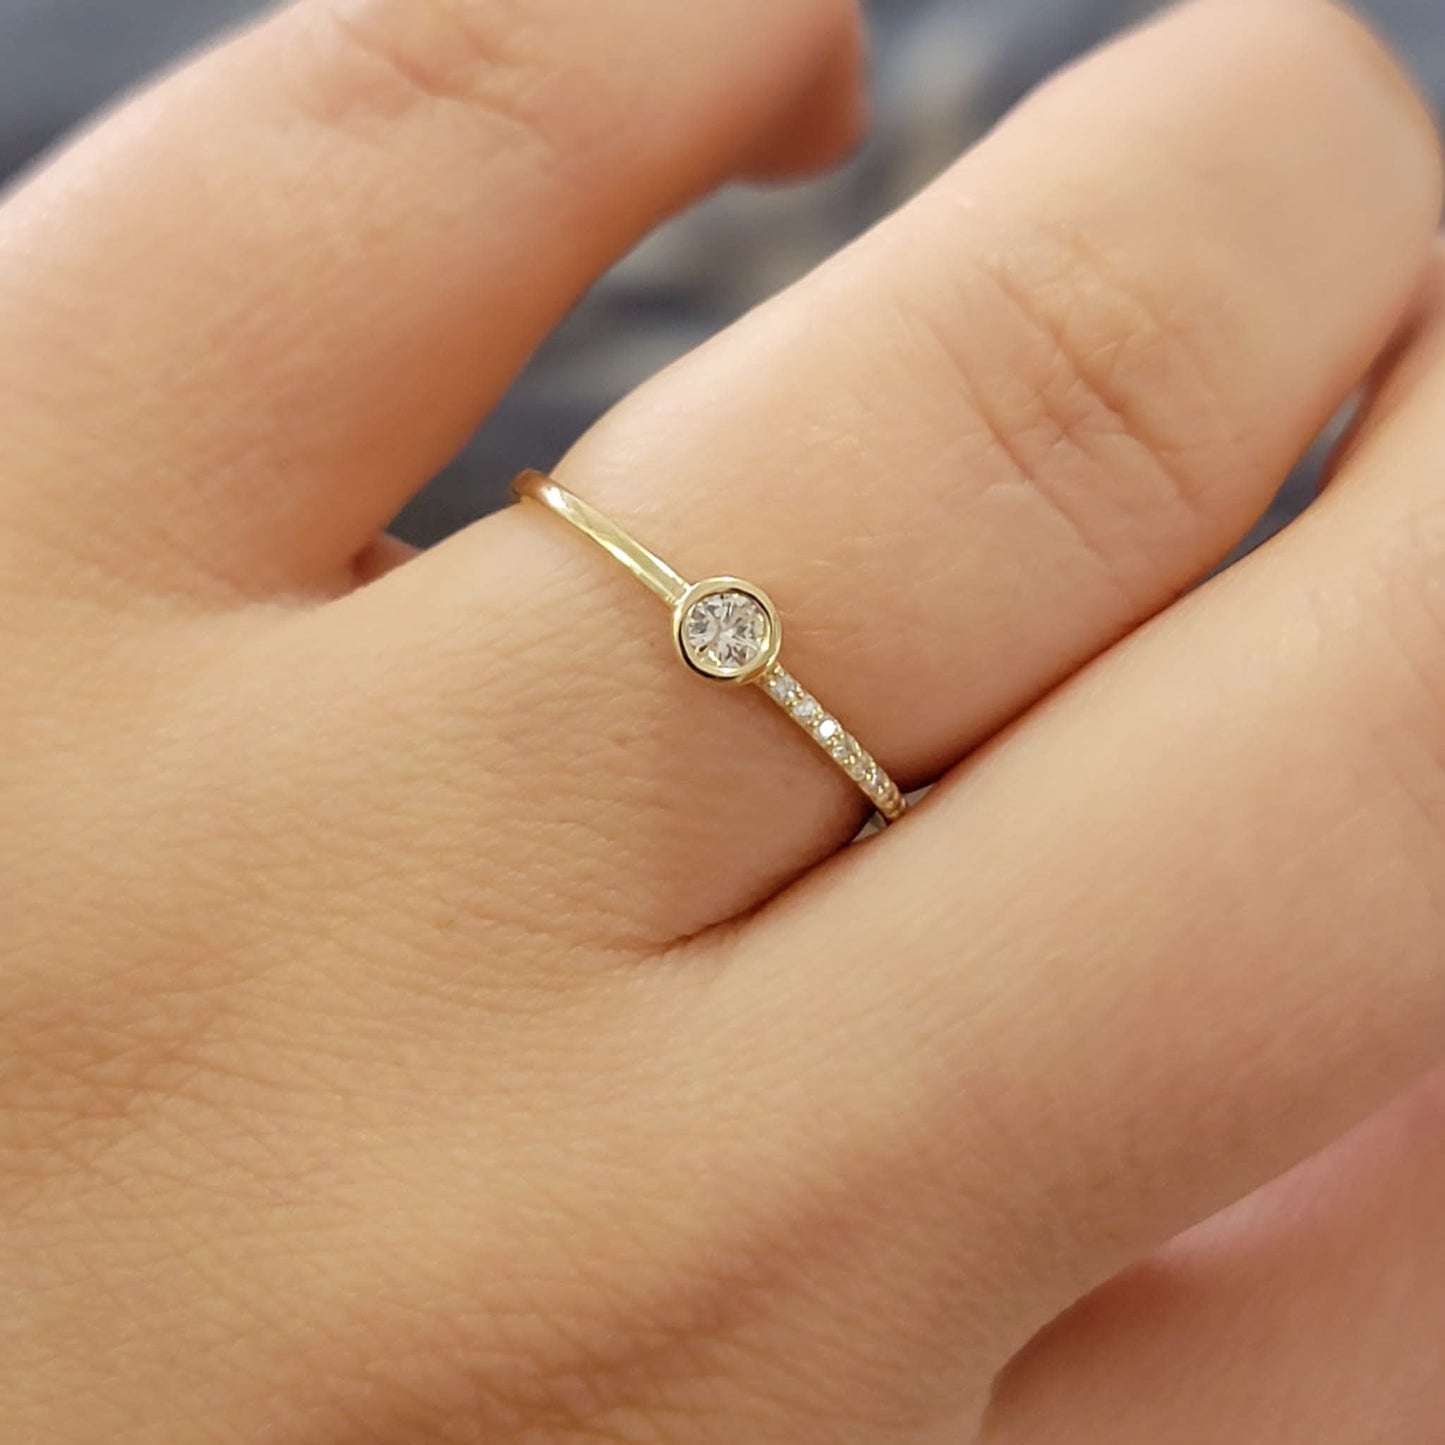 Diamond Solitaire Ring, Diamond Ring,  Solitaire Diamond Bezel Ring, Simple Diamond Ring, Promise Ring, Stacking Ring, Dainty Promise Ring